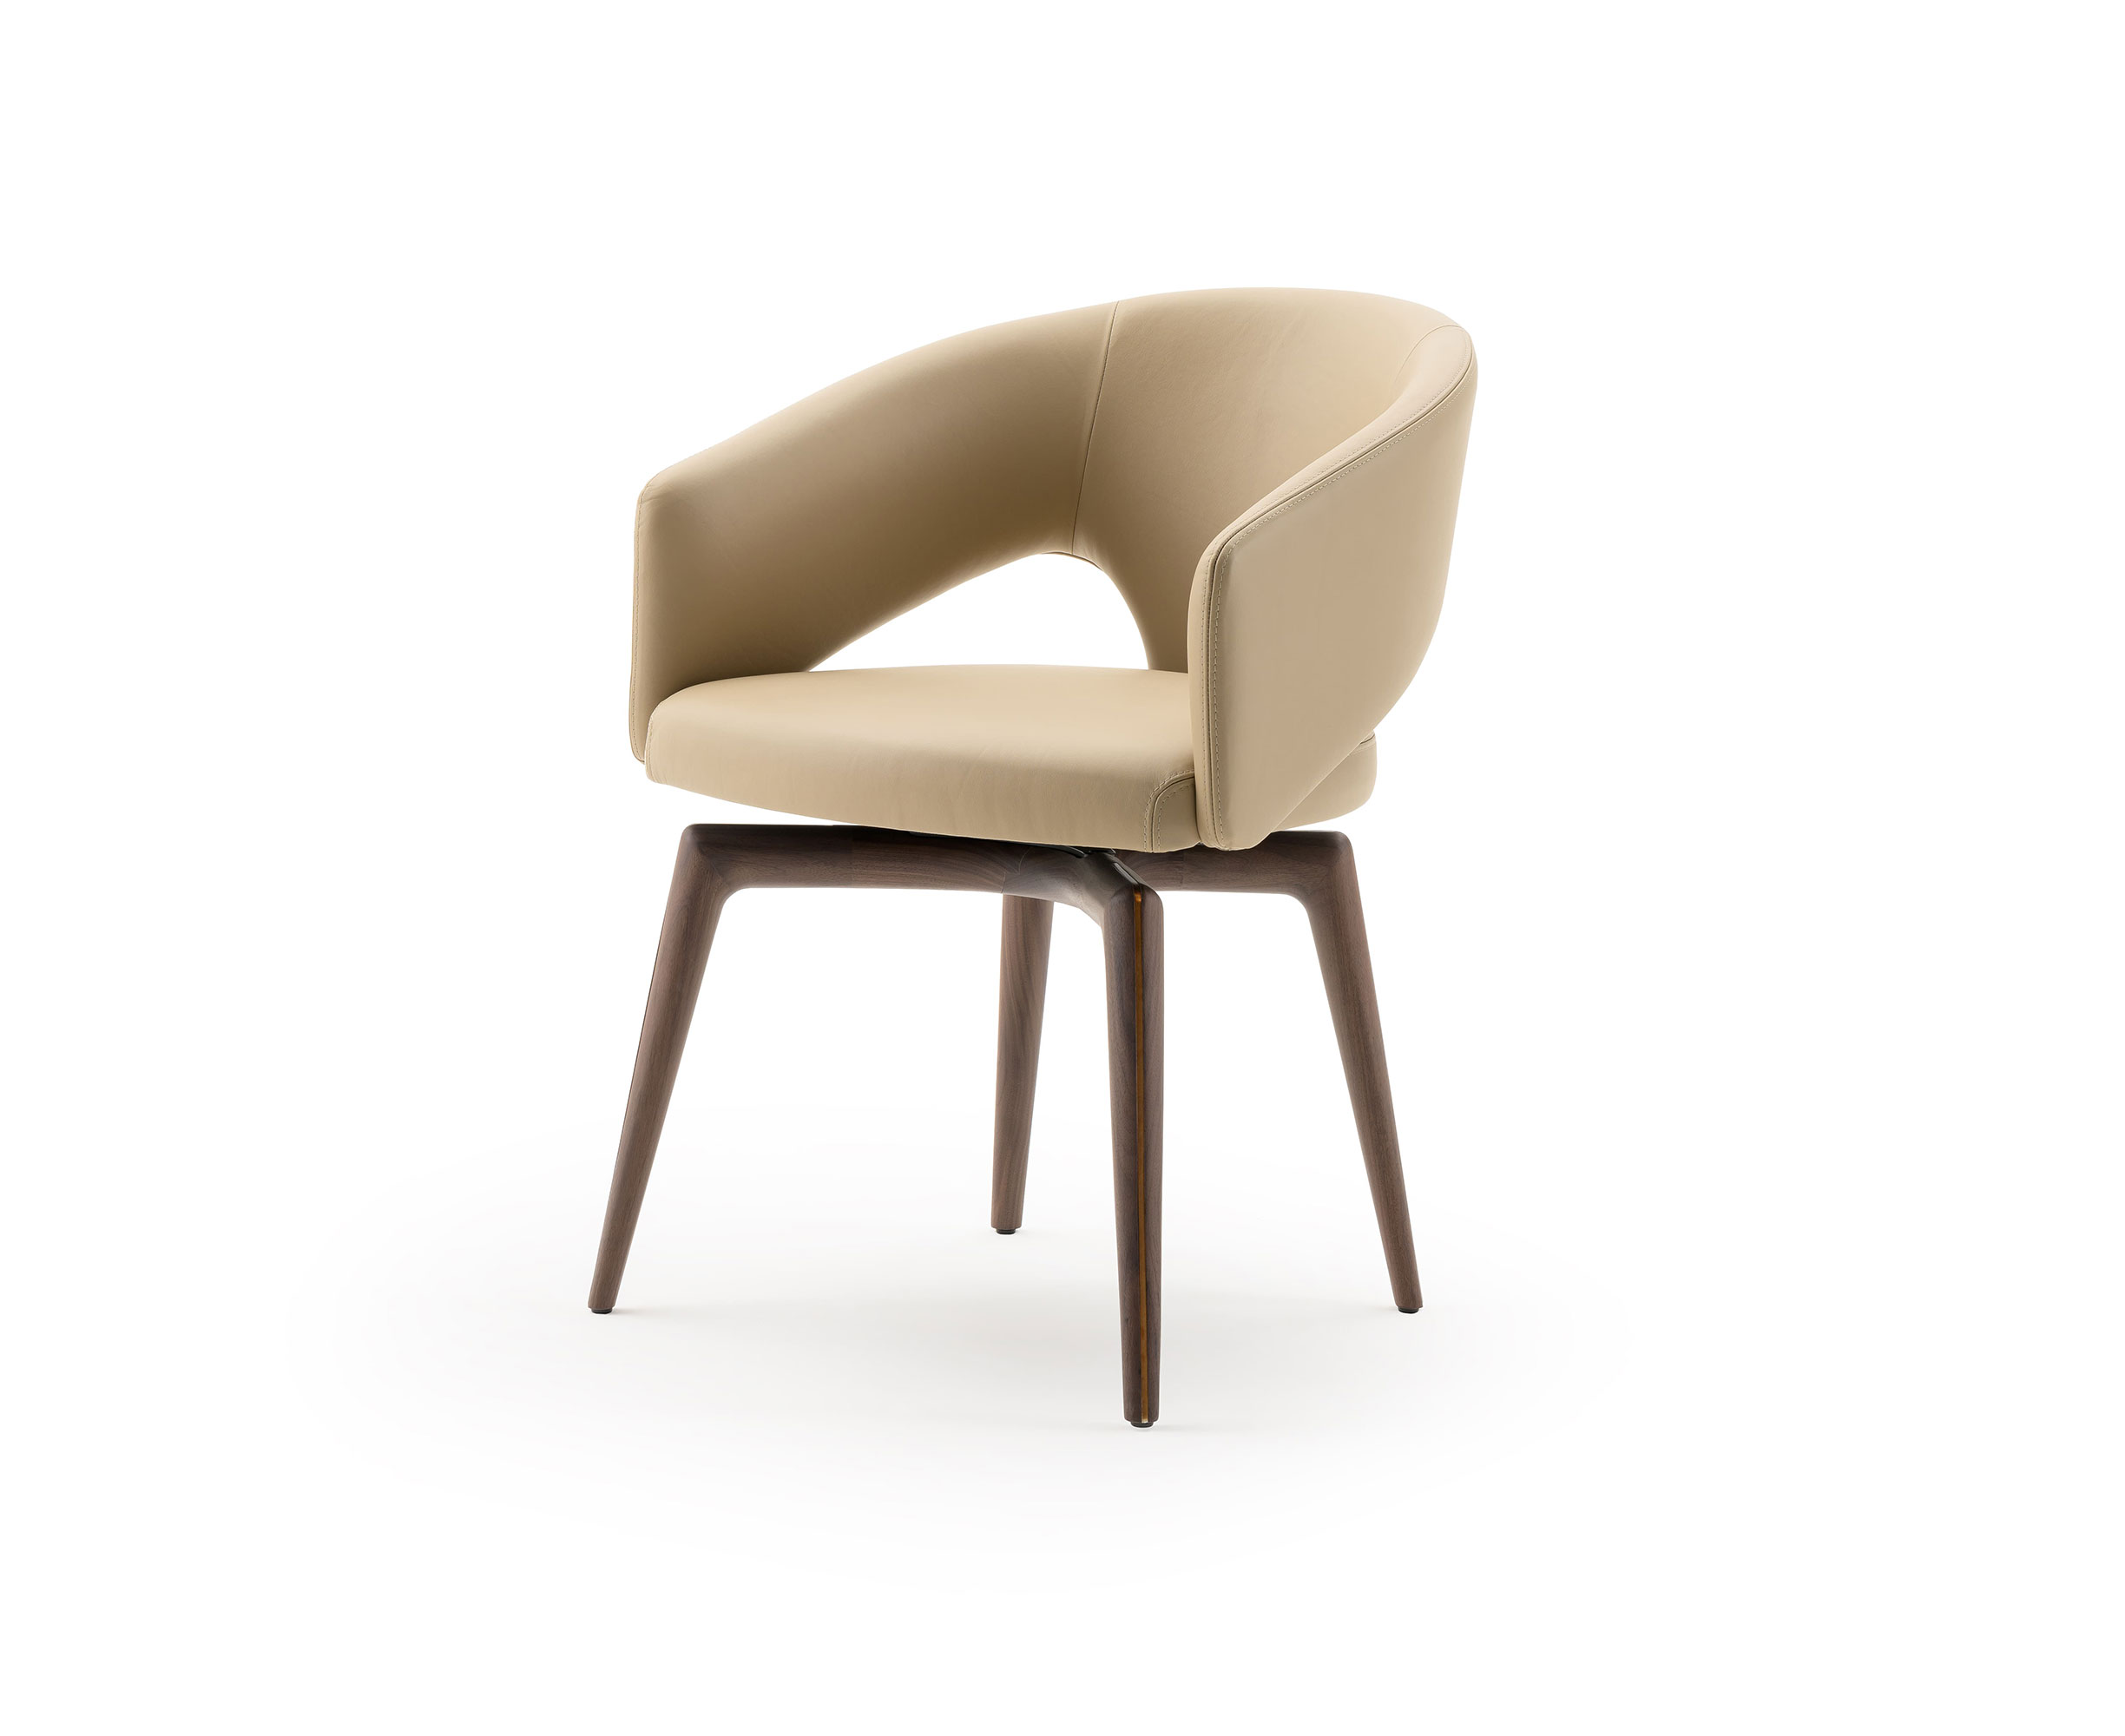 salone-2022-calls-attention-to-chair-designs-featuring-innovation-and-artistry